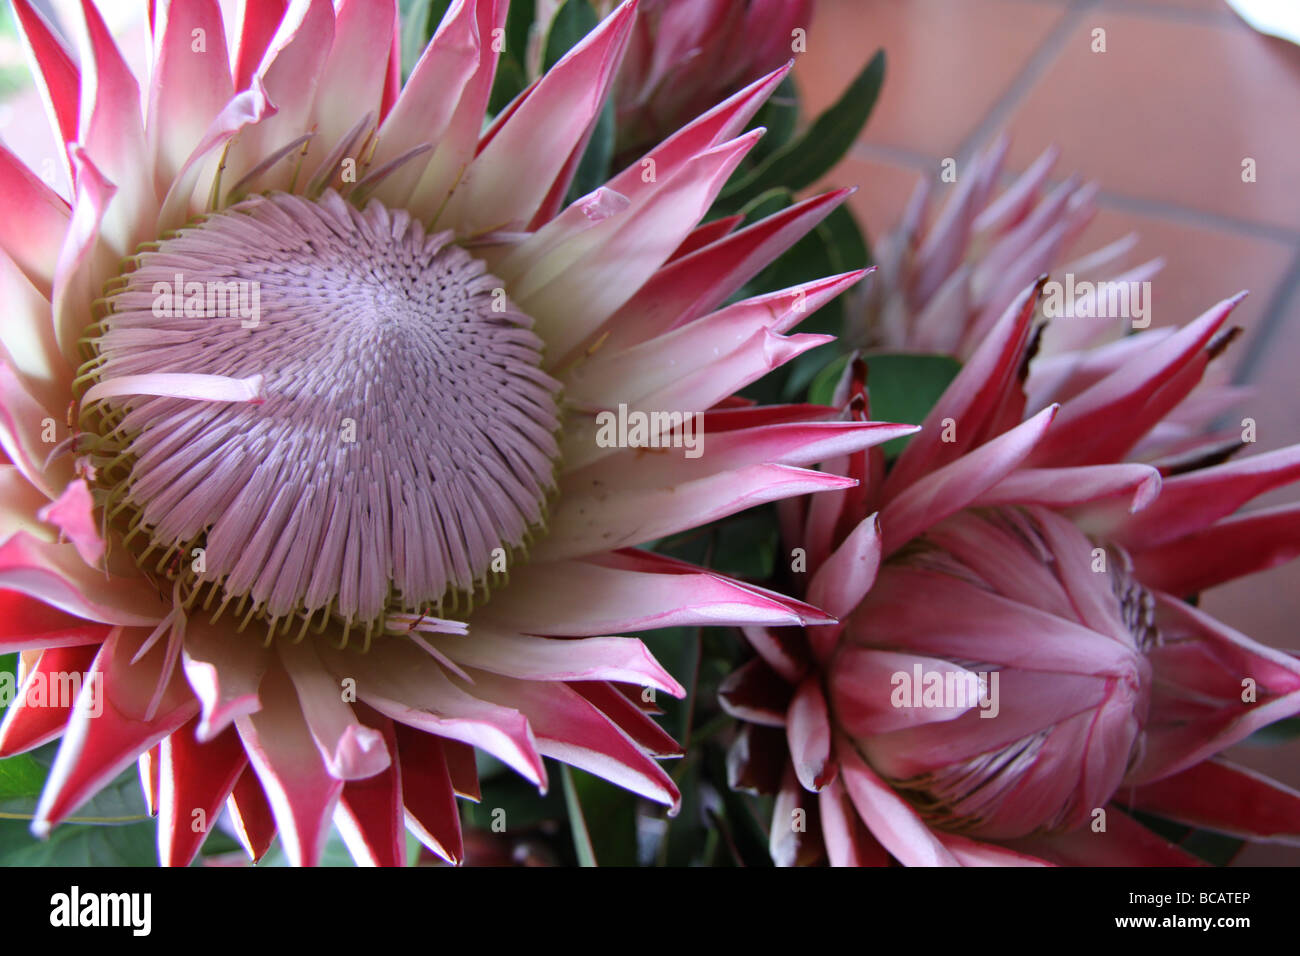 South African Protea in bloom Stock Photo